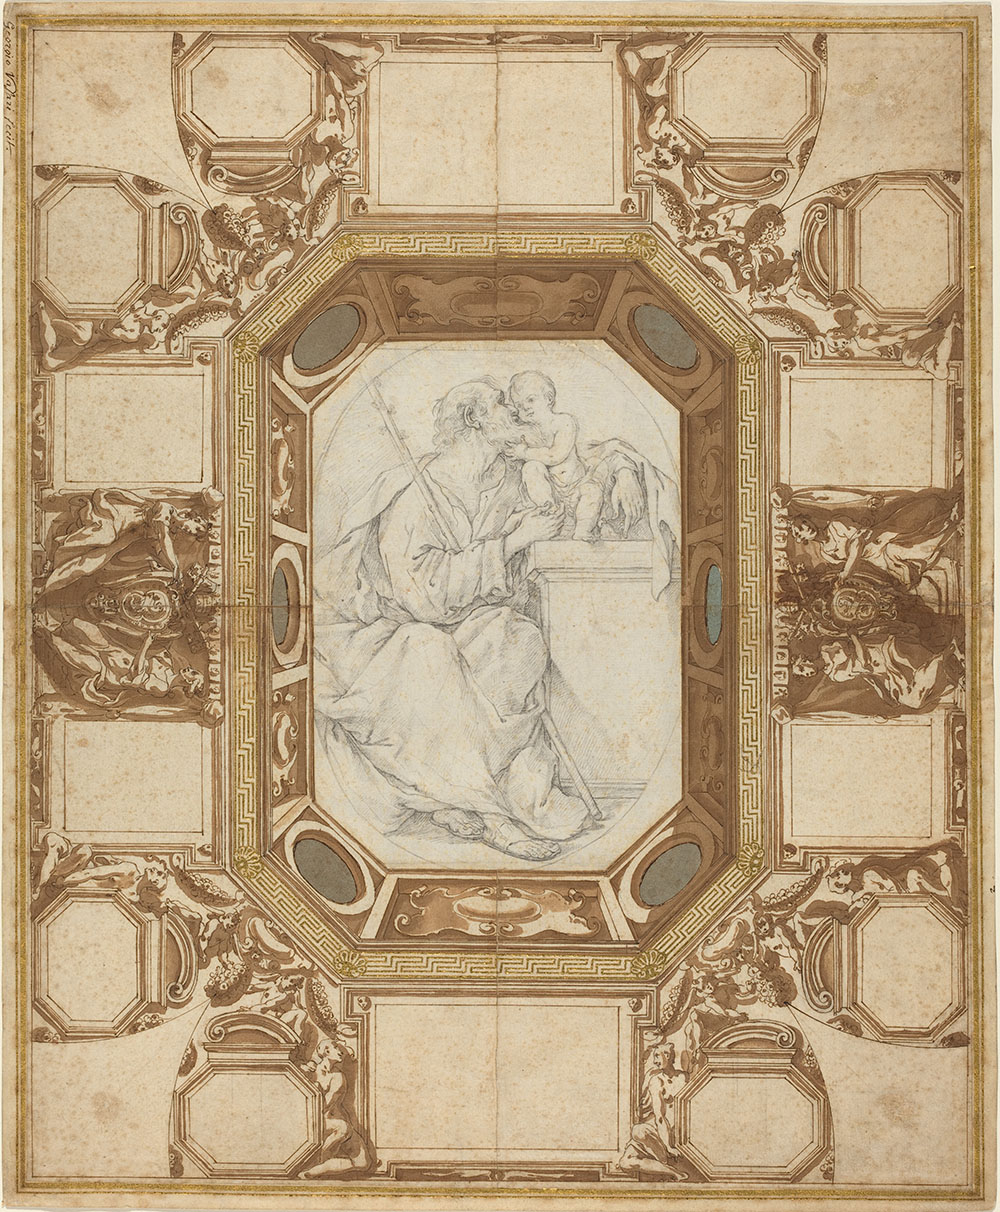 1587_Giovanni Guerra and Domenico Maria Viani_Ceiling with Allegorical Figures and the Arms of Pope Sixtus V_5657-010